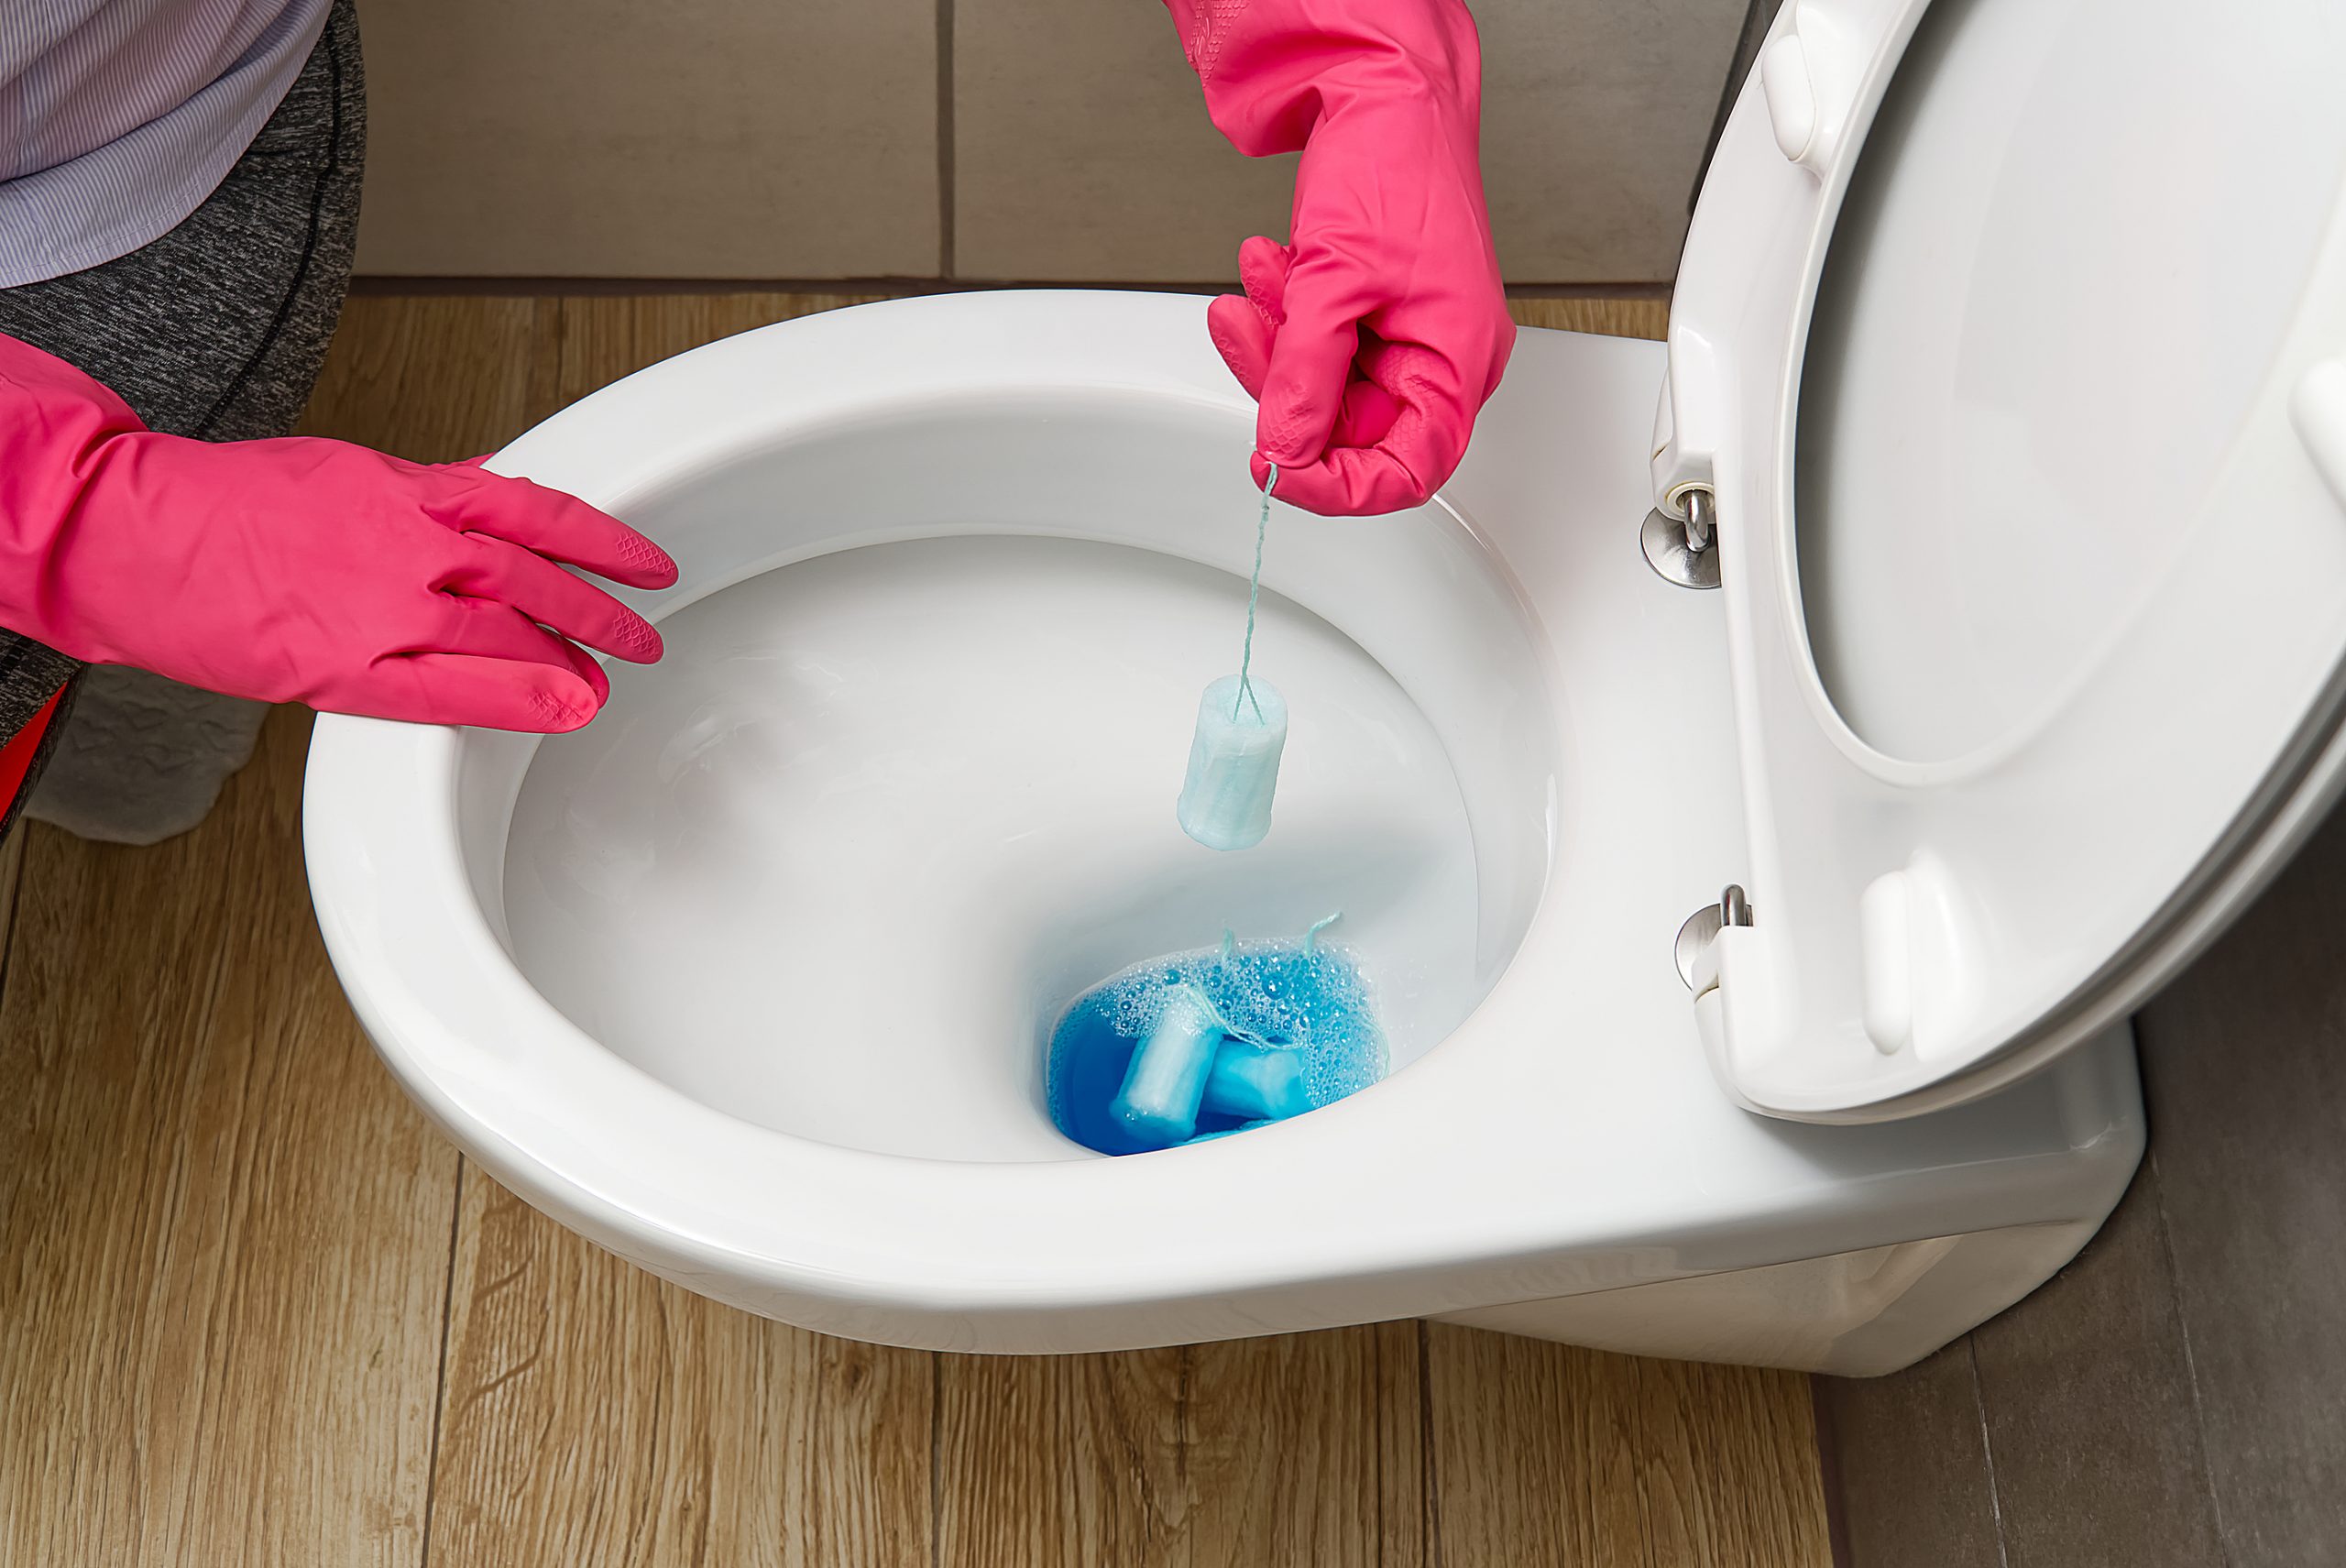 This Is What Happens When You Put Vinegar In Your Toilet